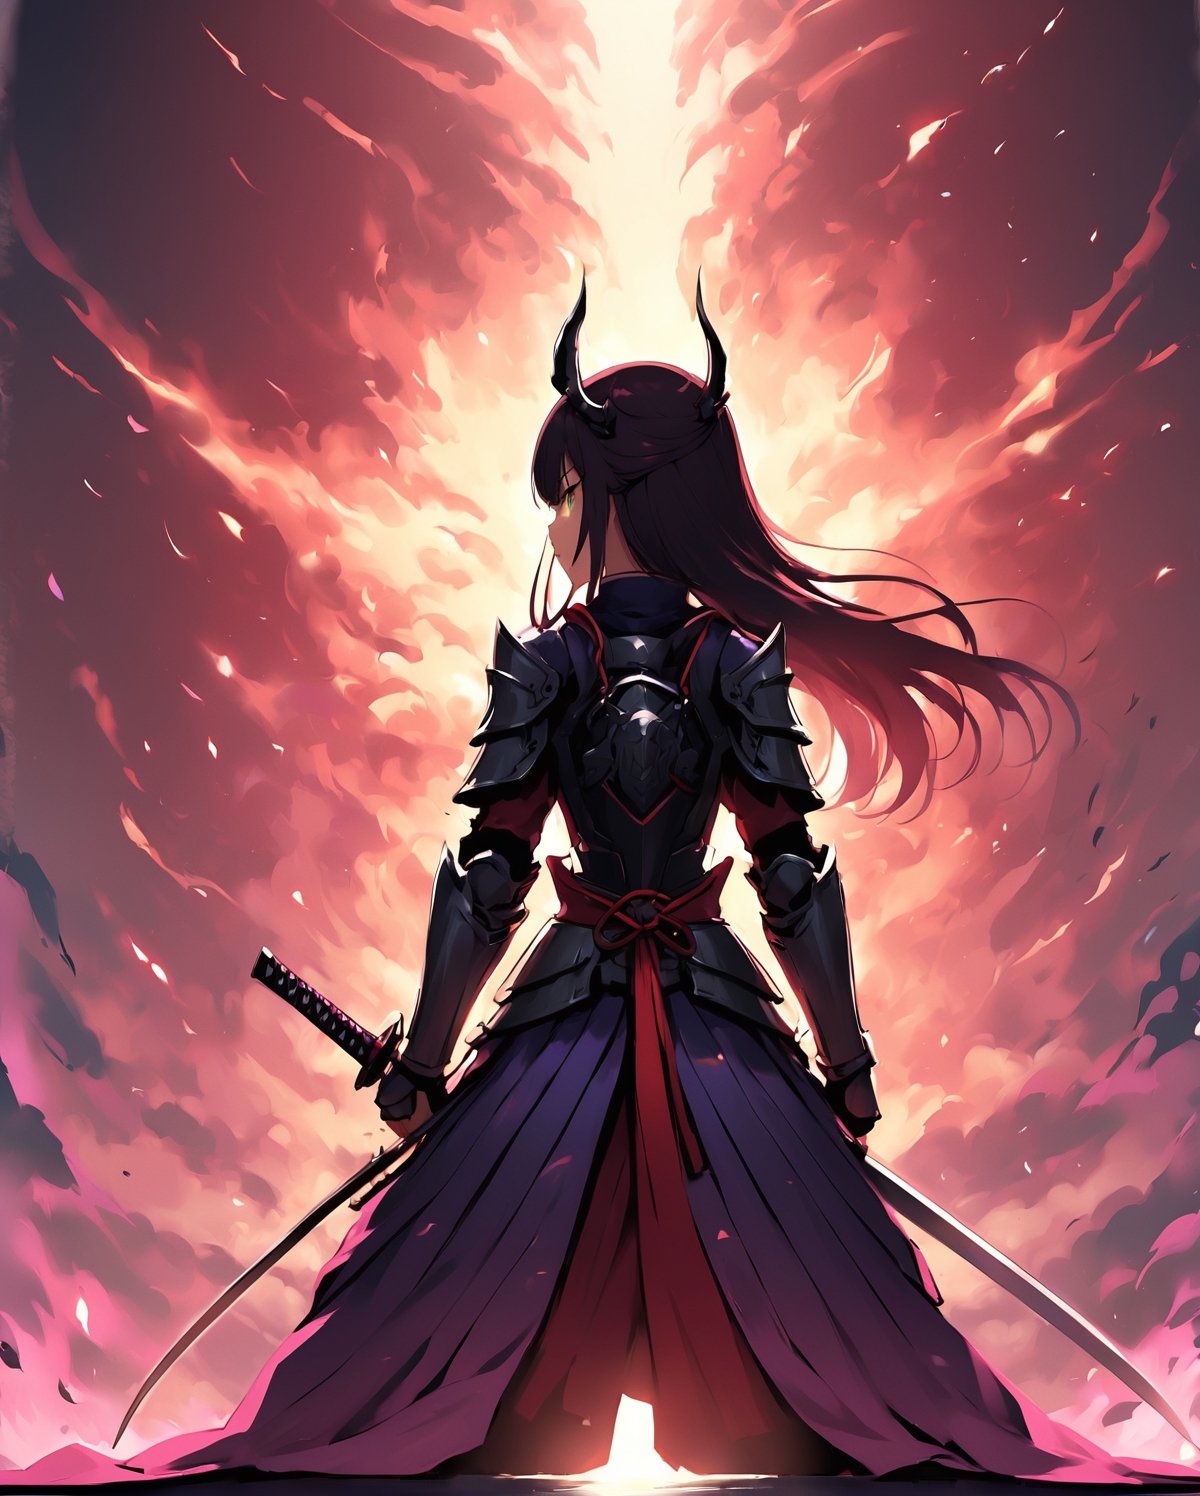 Imagine an exhilarating anime artwork reminiscent of a dynamic movie poster, featuring a fierce Japanese female samurai in the spotlight. Picture her in a powerful stance, donned in traditional yet stylish samurai armor, with a katana unsheathed and gleaming in the foreground. Visualize dramatic lighting casting dynamic shadows, highlighting the intensity in her eyes and the determination etched on her face. Surround her with elements that evoke the feudal era, such as cherry blossoms or a feudal castle, creating a backdrop that complements the narrative. Craft a compelling composition that captures the essence of this cinematic moment, promising an epic tale of bravery and honor.